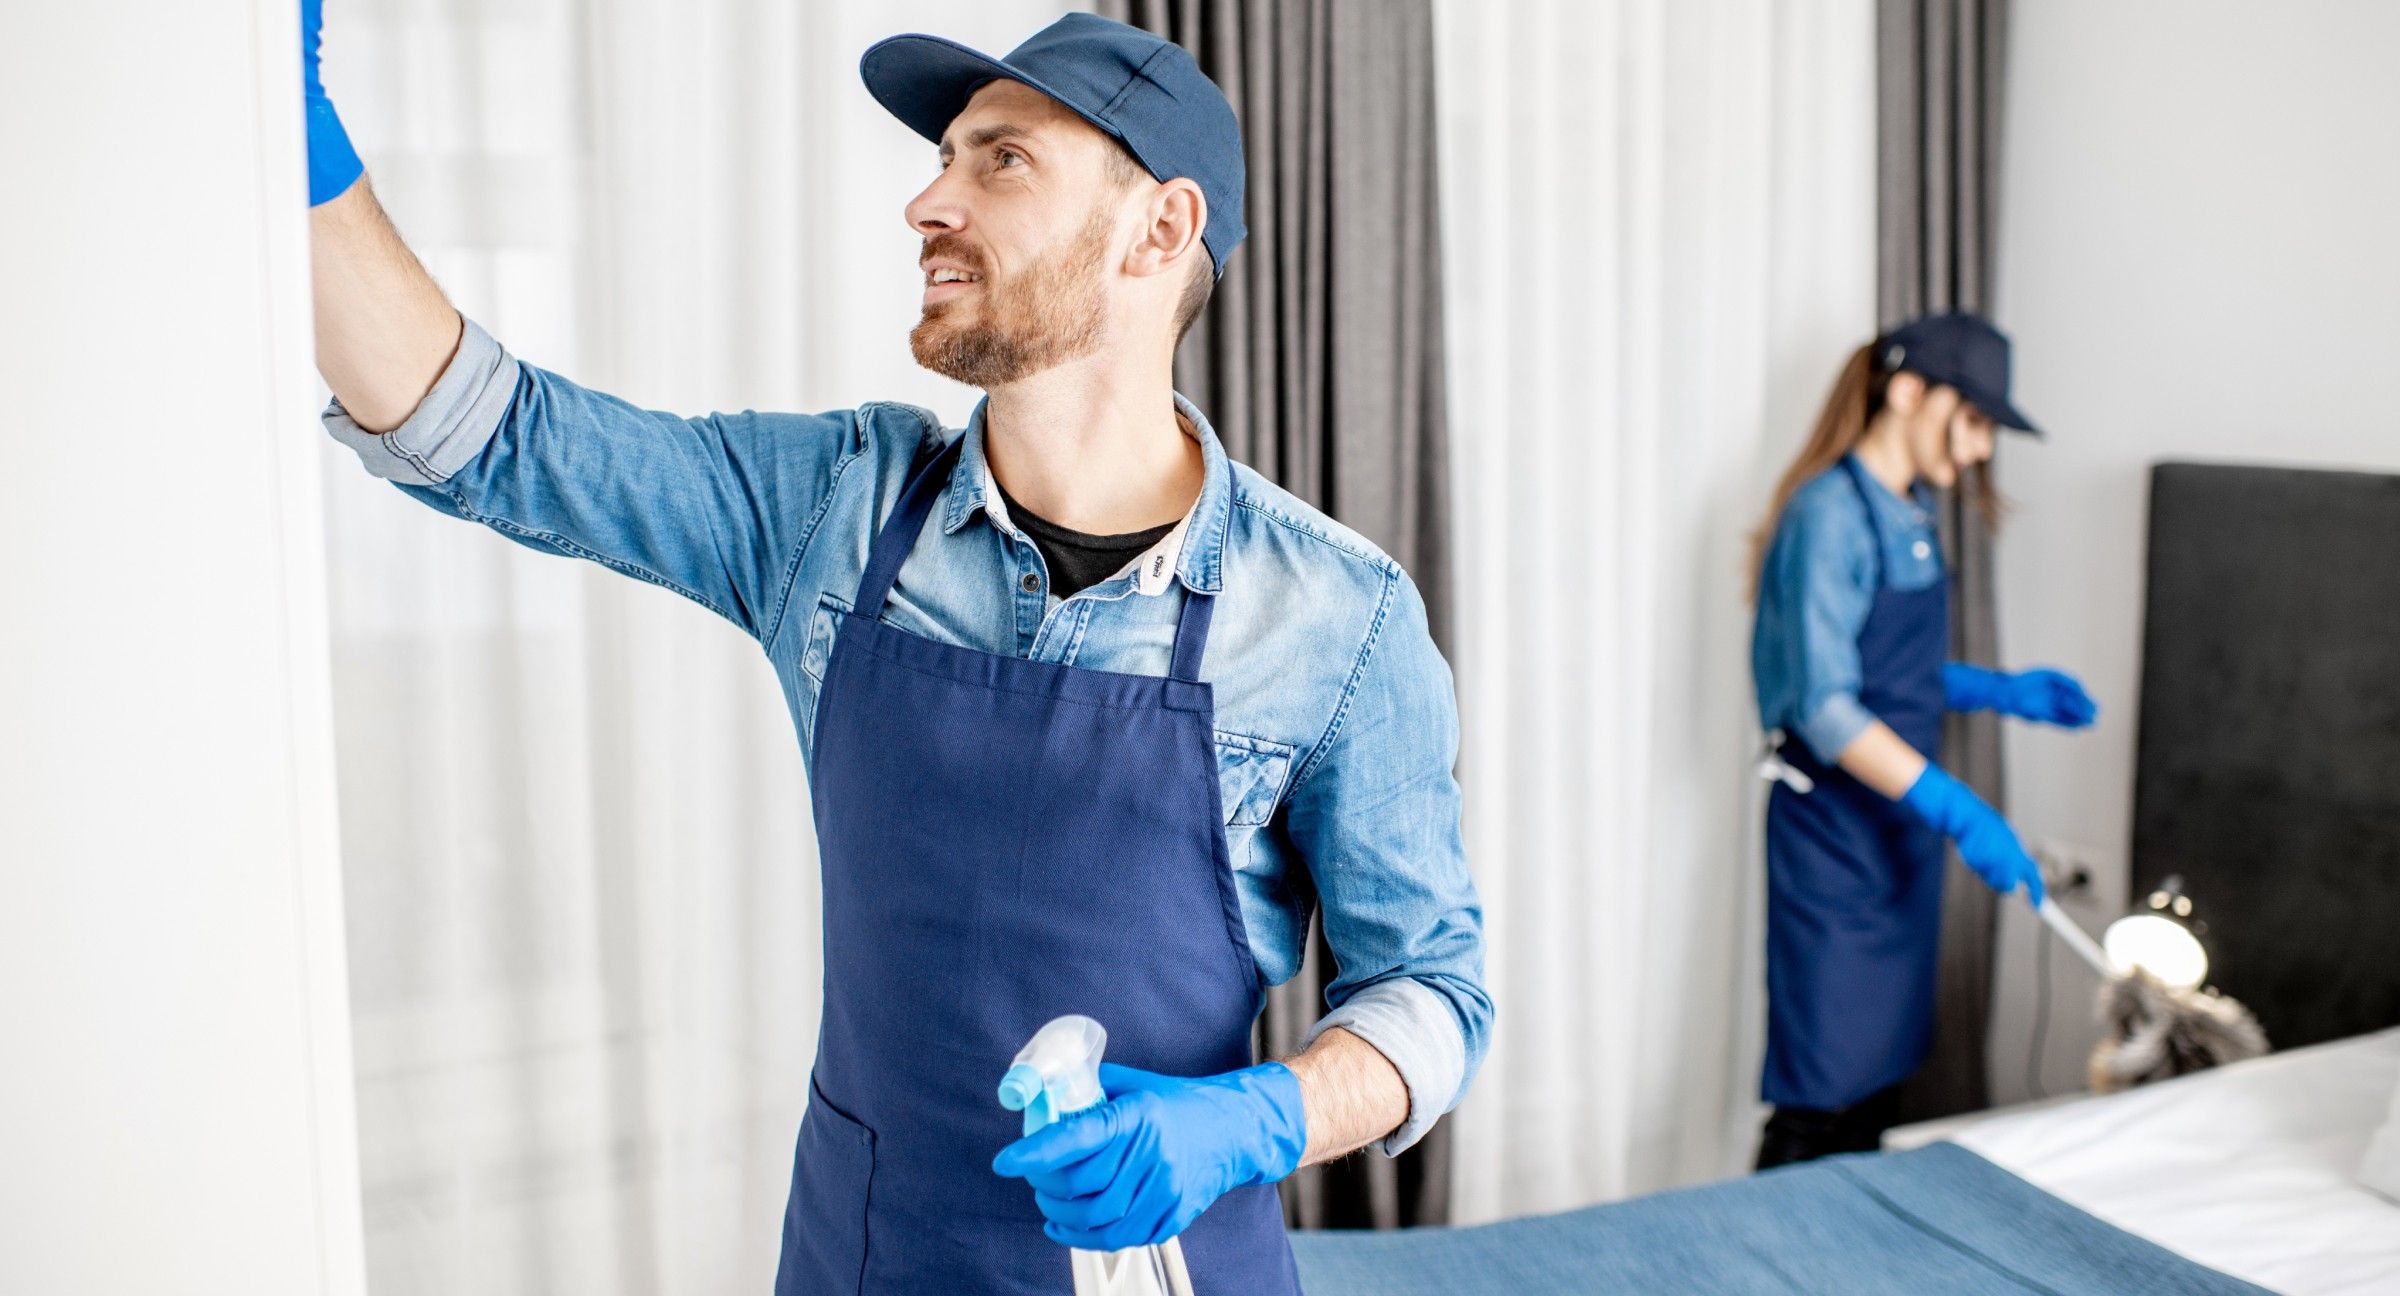 In the hotel industry, it is important that shared spaces remain clean & regularly maintained. Read on for 5 helpful tips on your daily disinfectant practices.